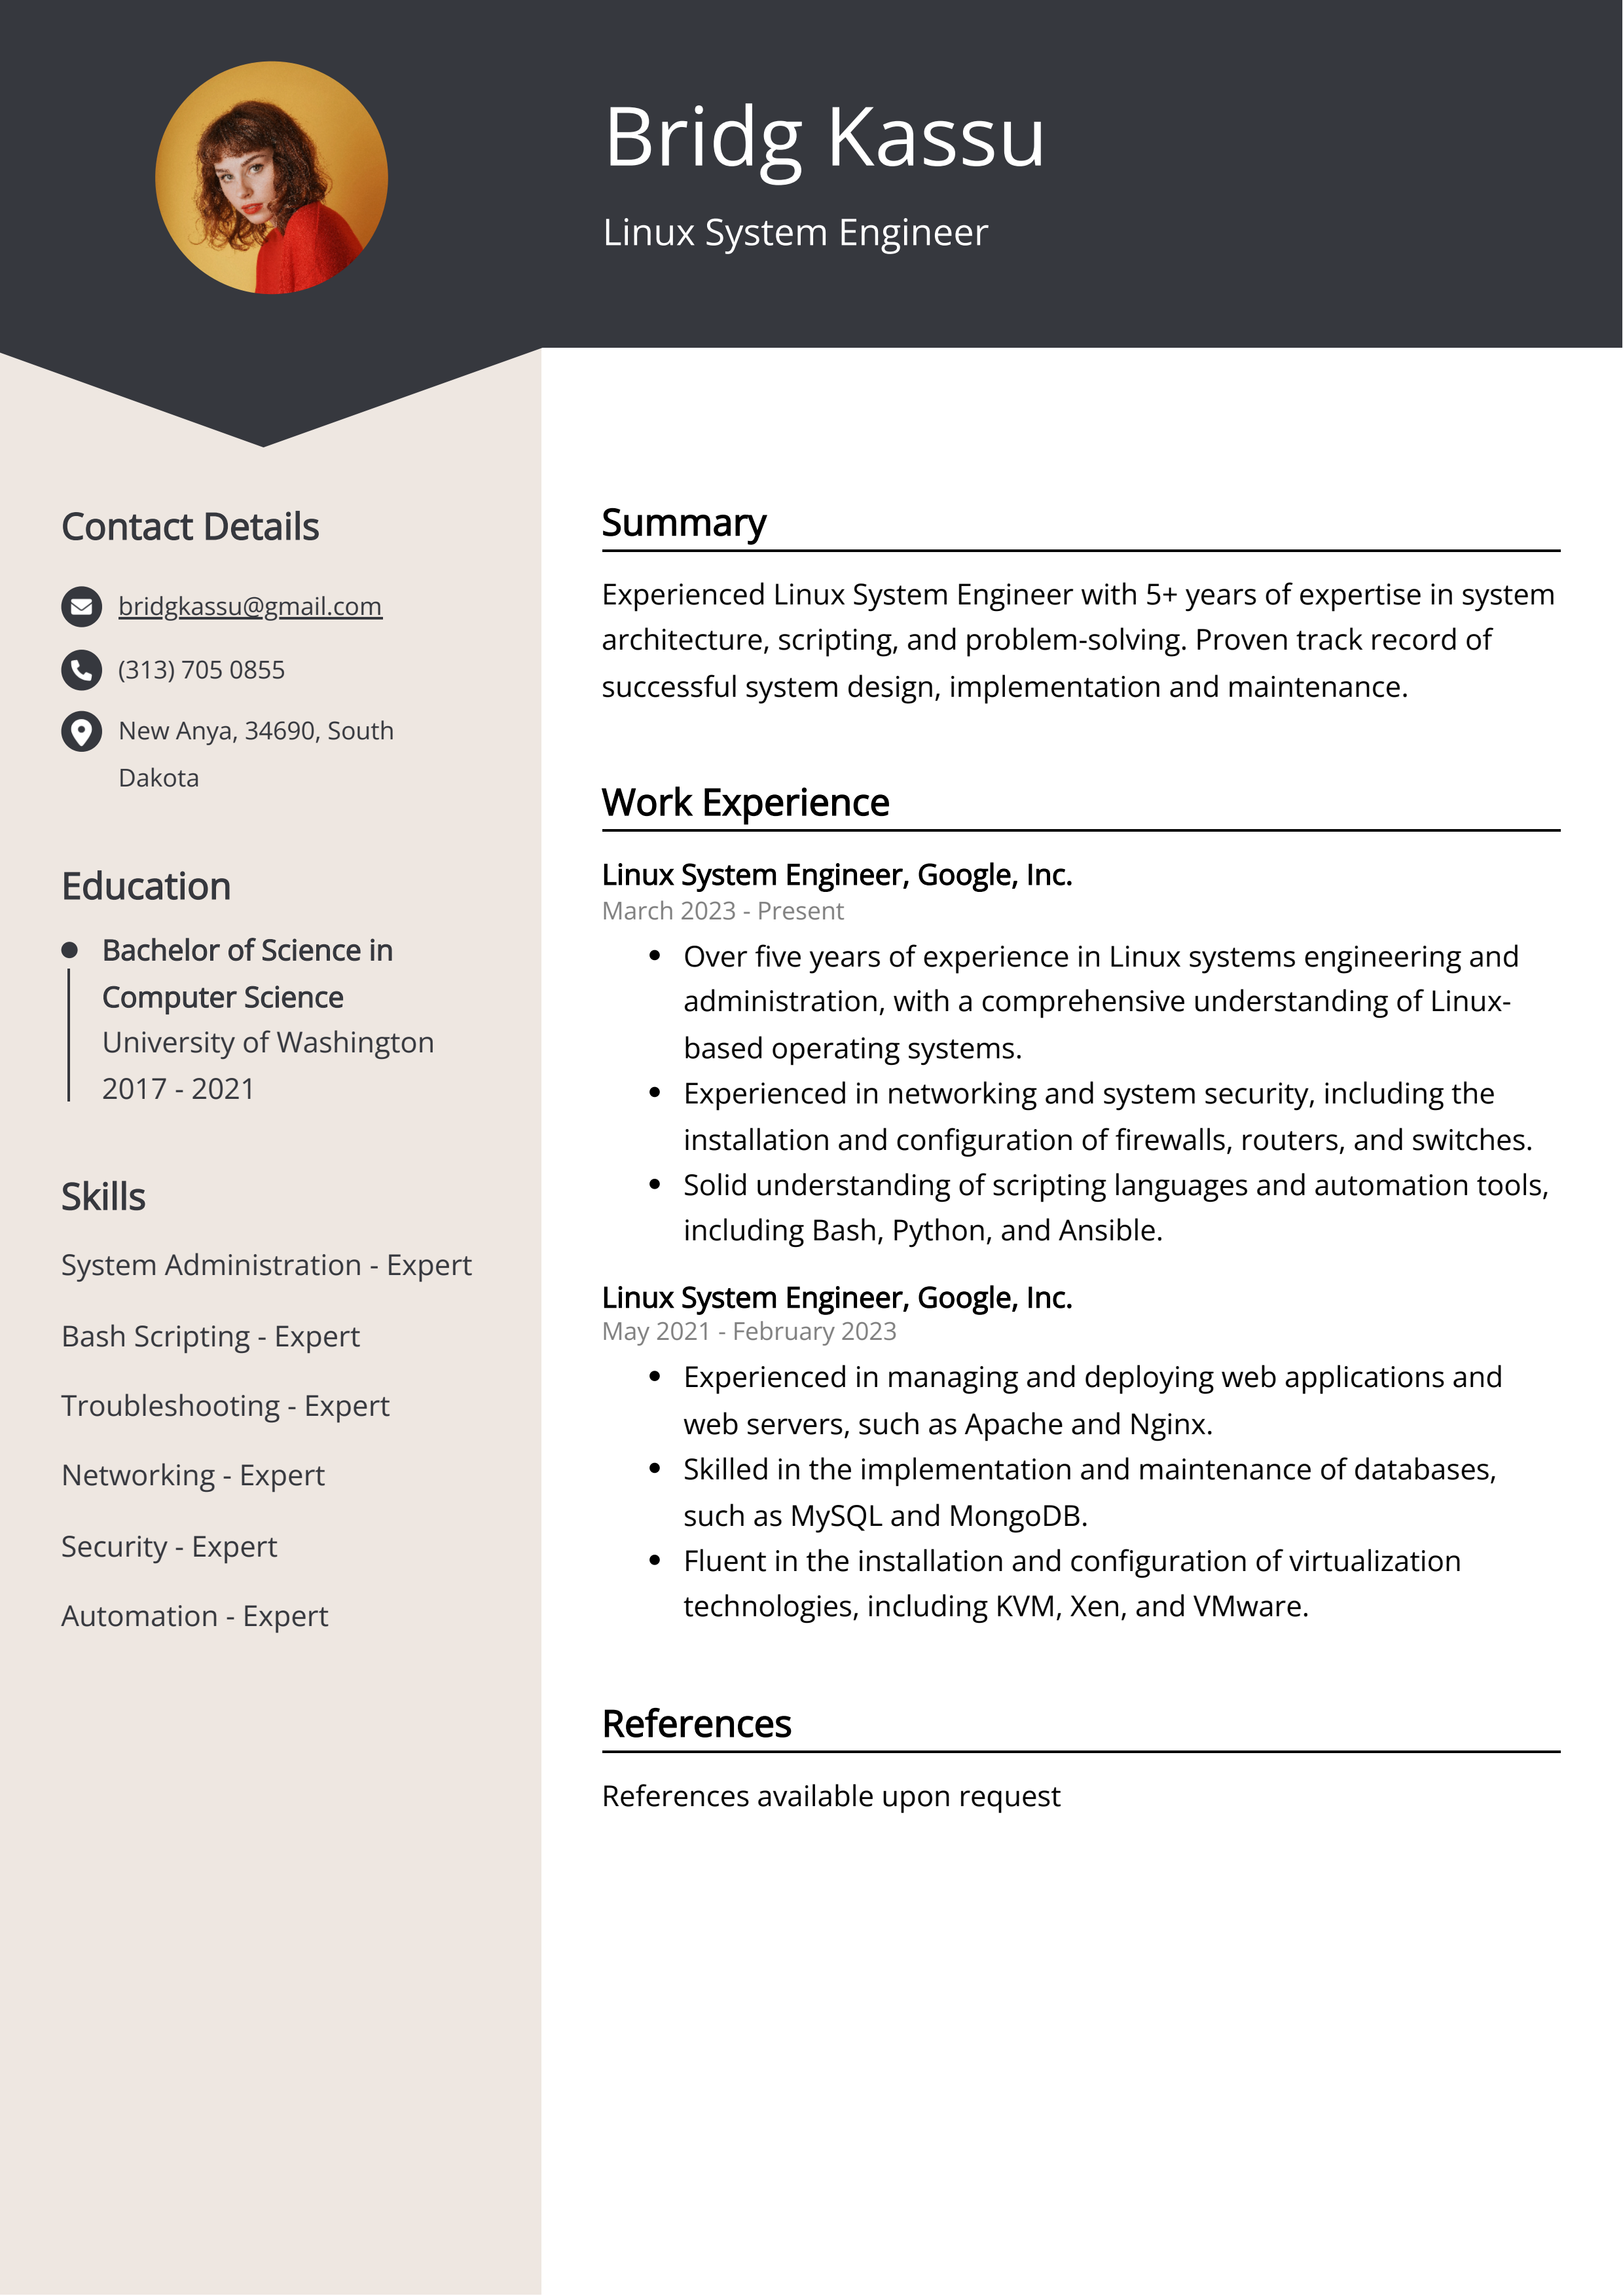 Linux System Engineer CV Example